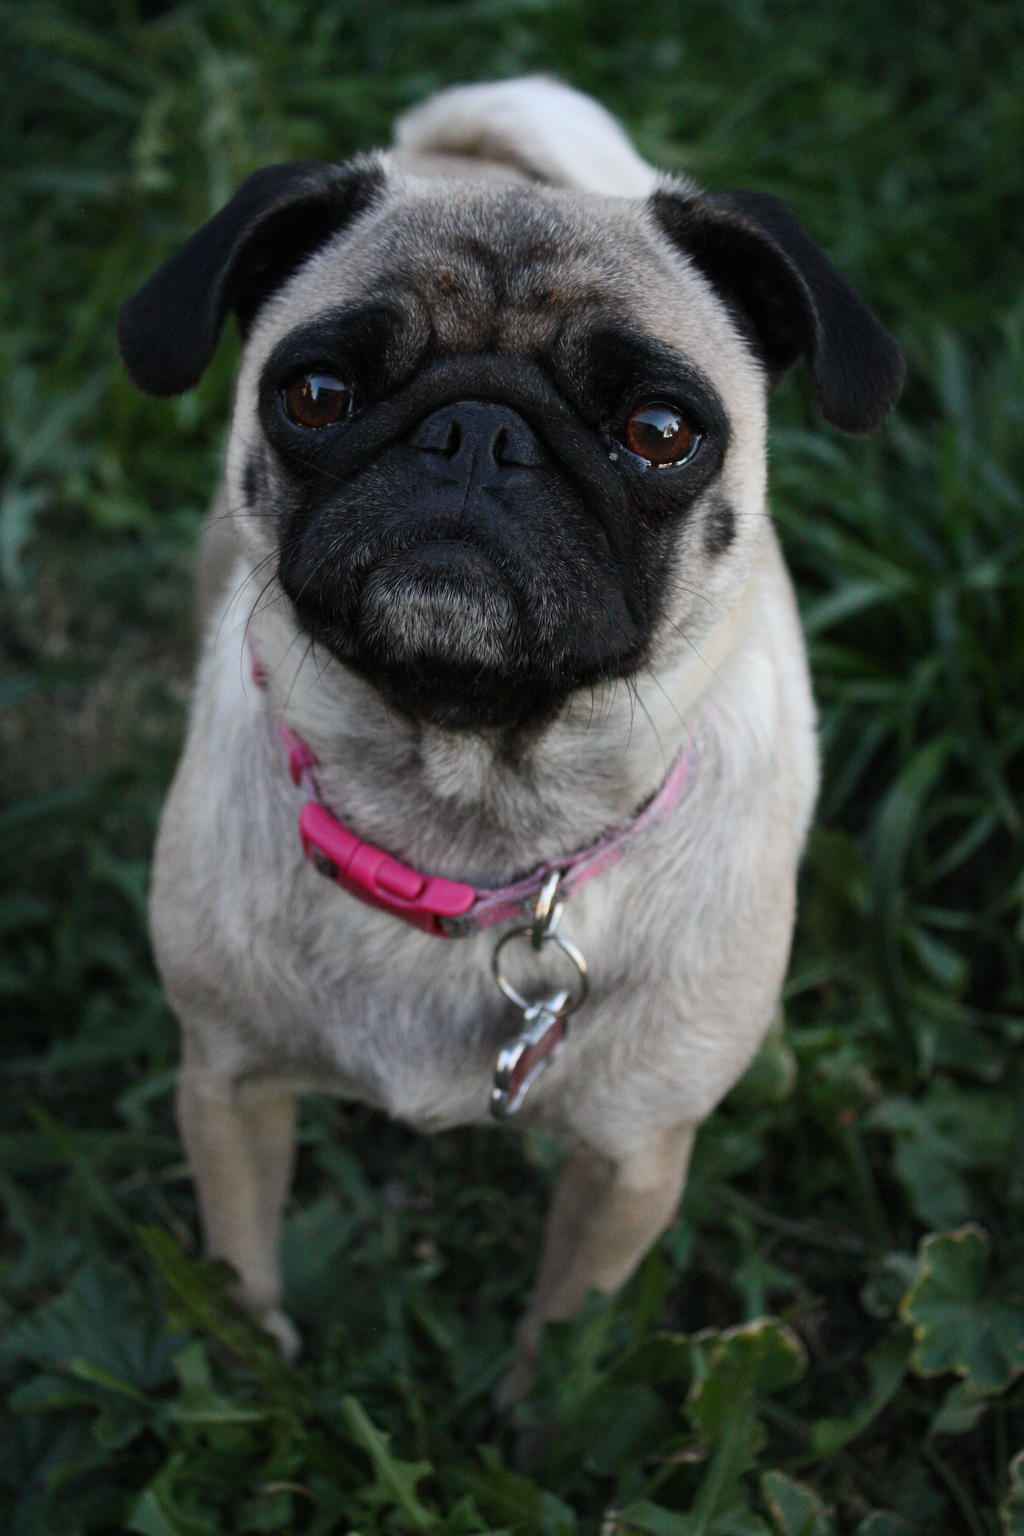 Anabelle the Pug